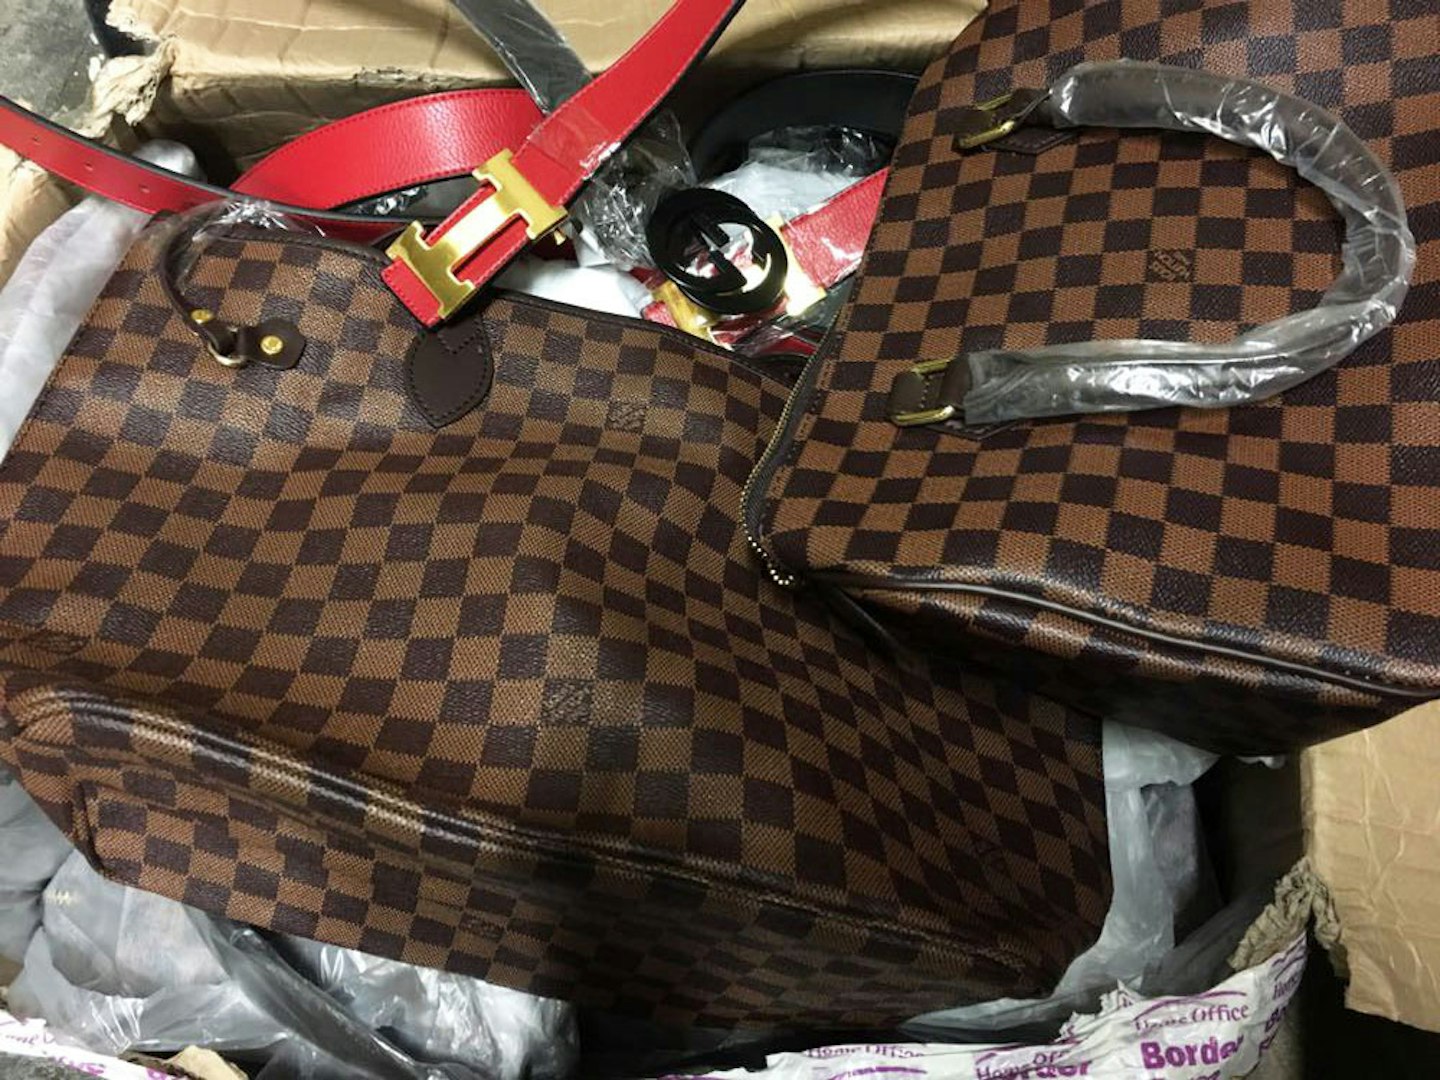 Fake Make Up And Rip Off Handbags: The True Cost Of Christmas Counterfeits